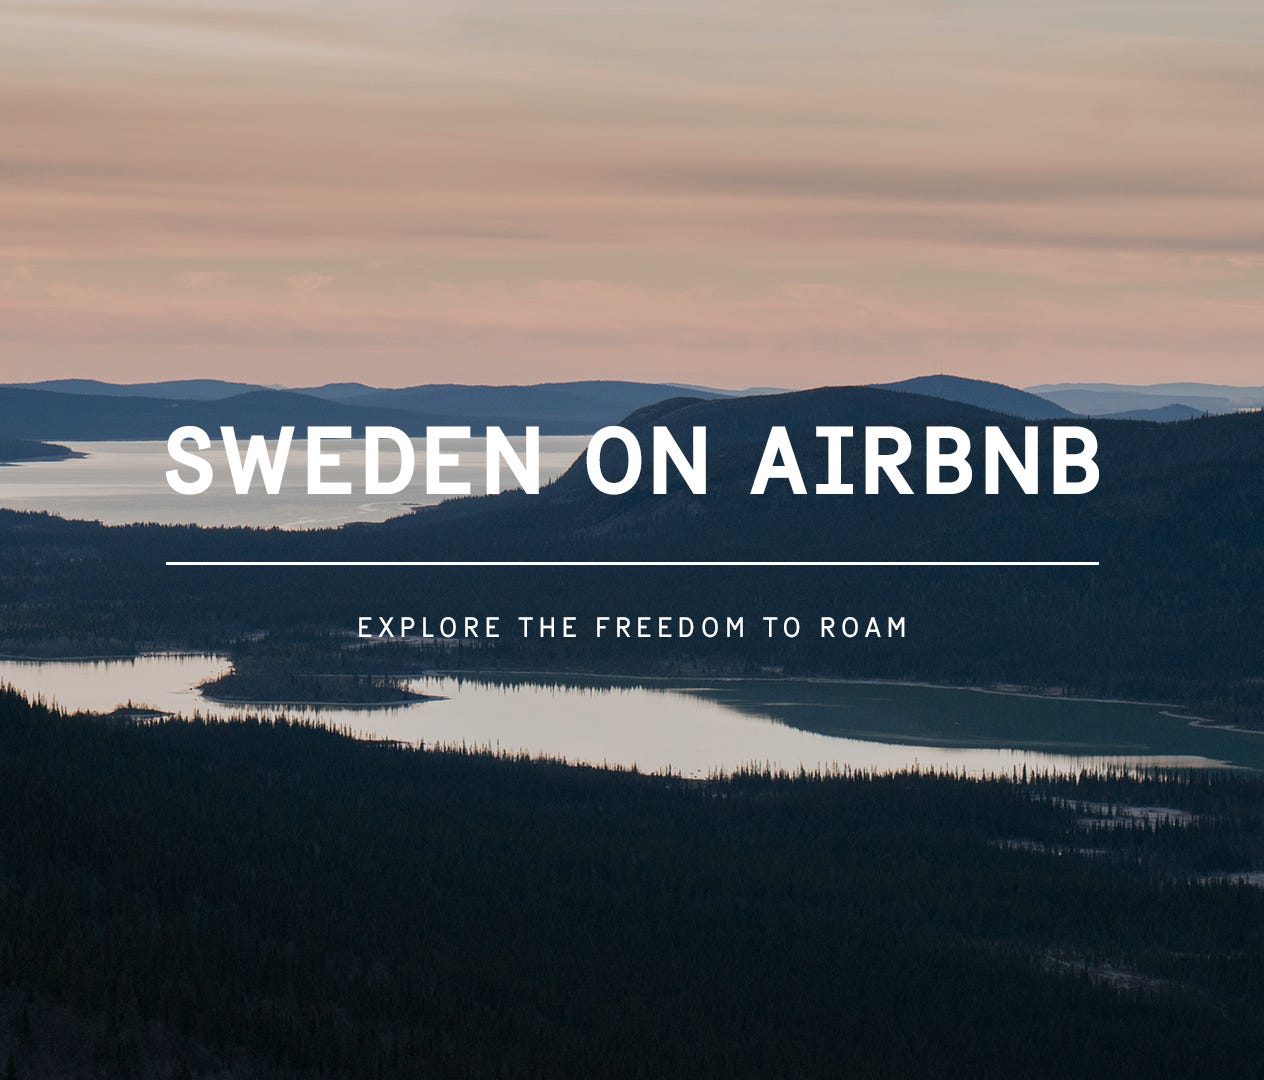 An advertisement for Sweden and its 